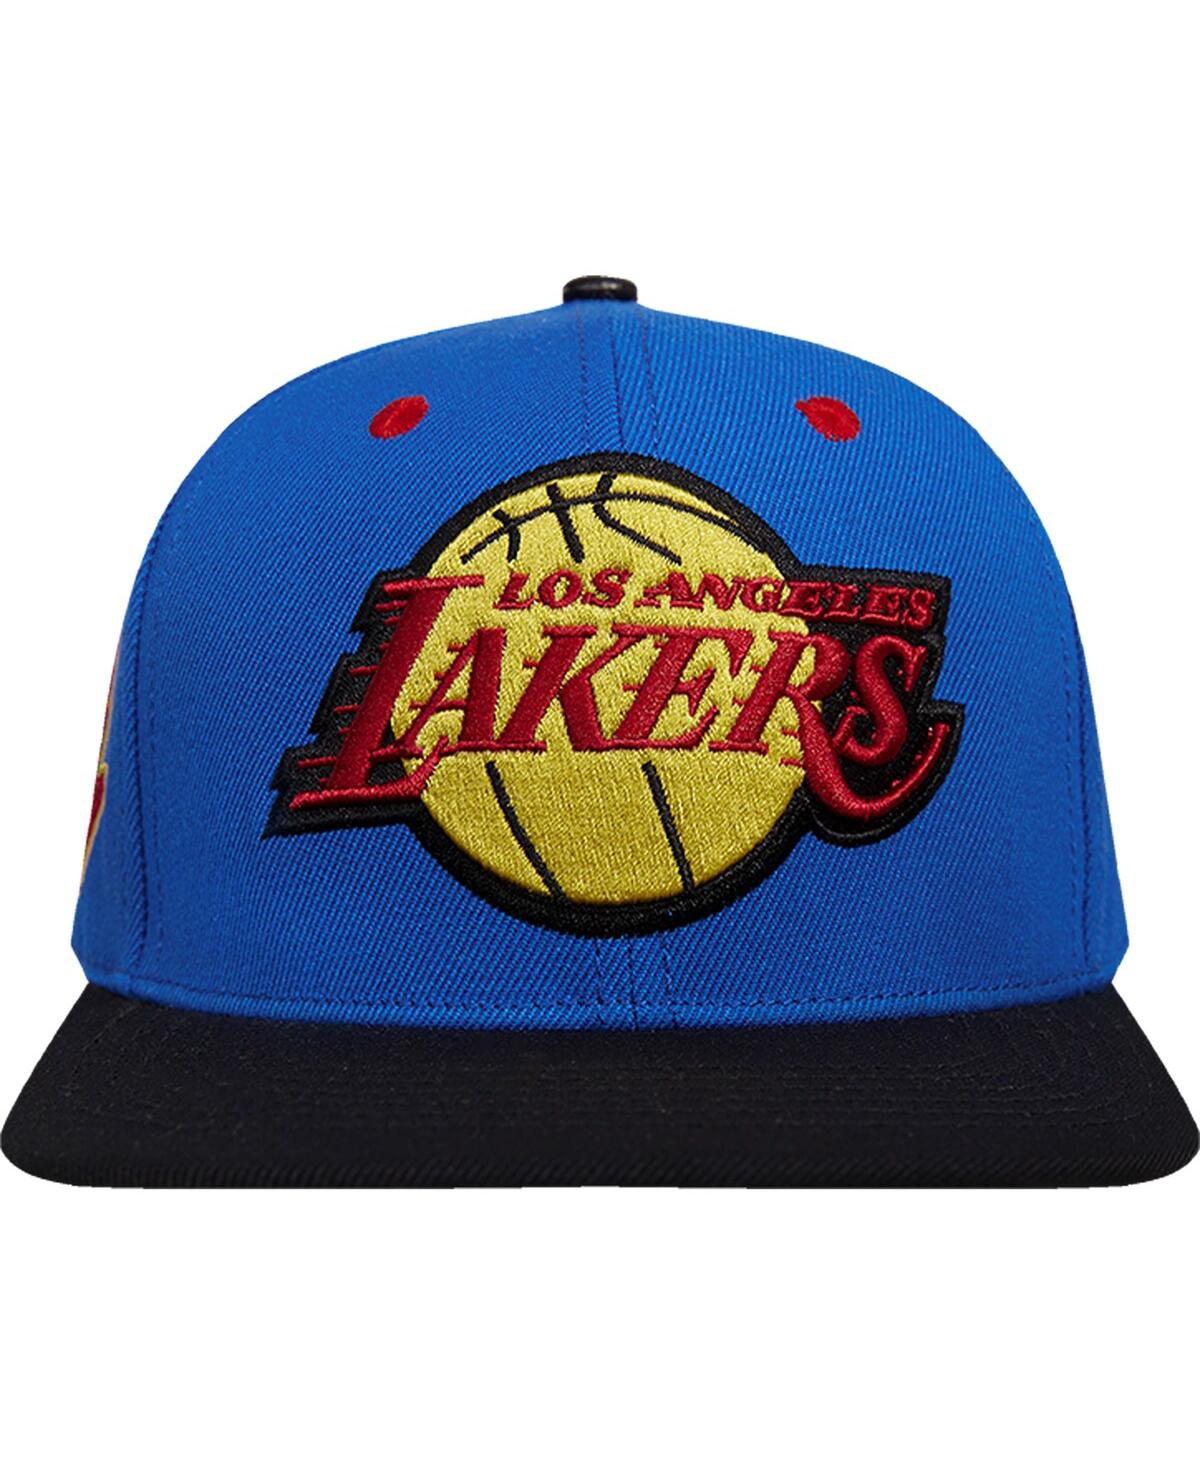 Shop Pro Standard Men's  Royal Los Angeles Lakers Any Condition Snapback Hat